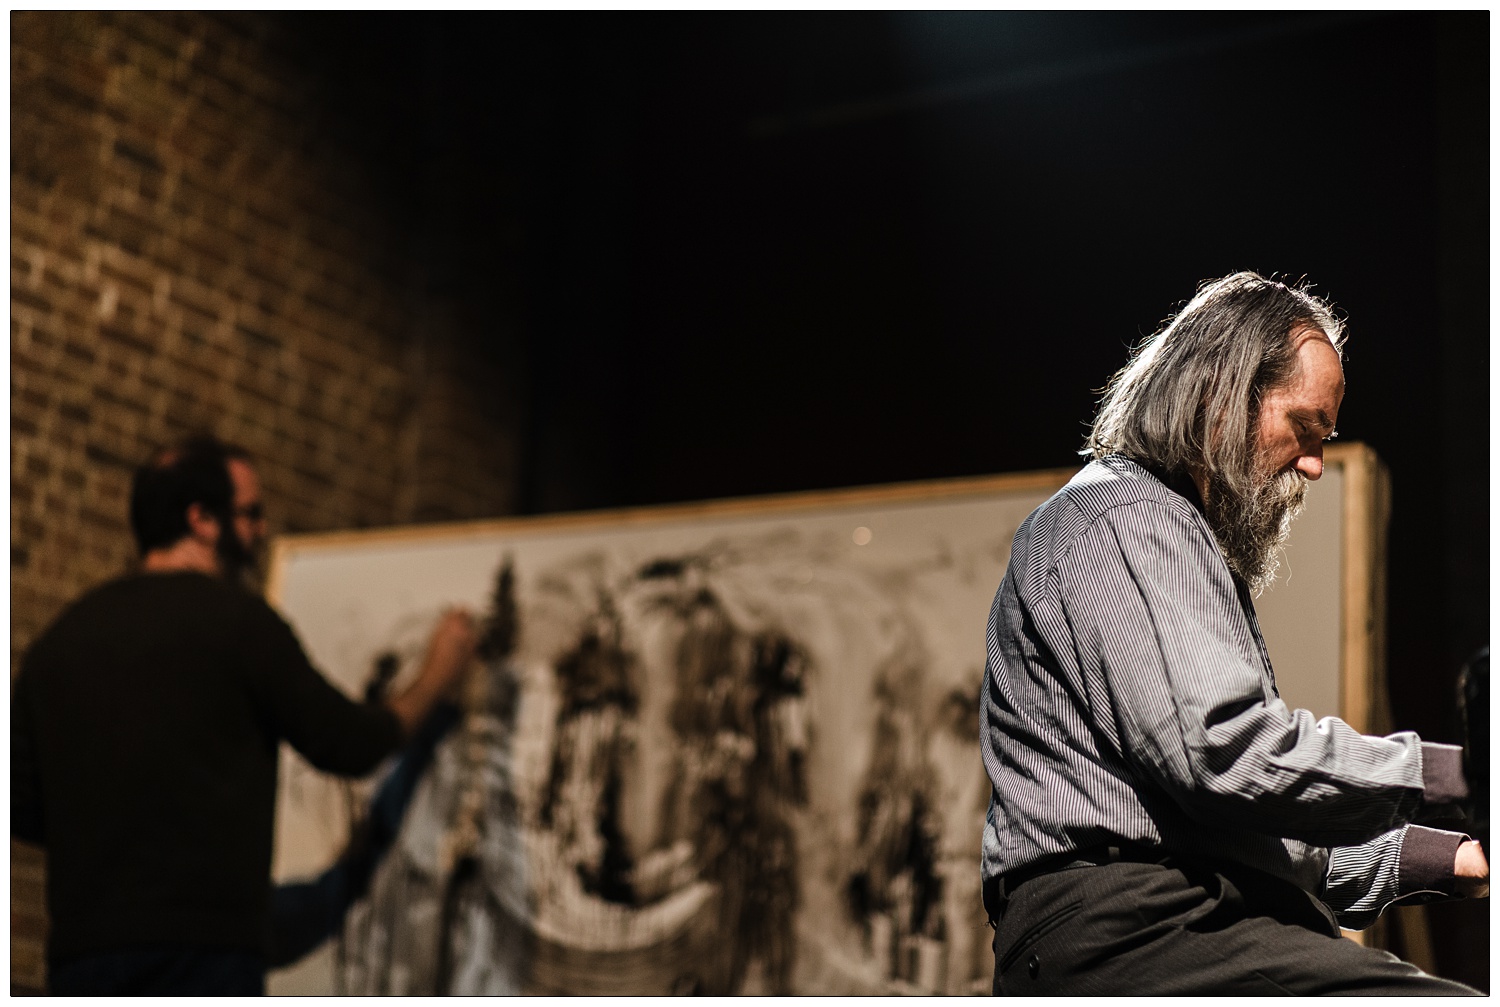 Lubomyr Melnyk playing continuous music on the piano while Gregory Euclide paints at the Village Underground in London